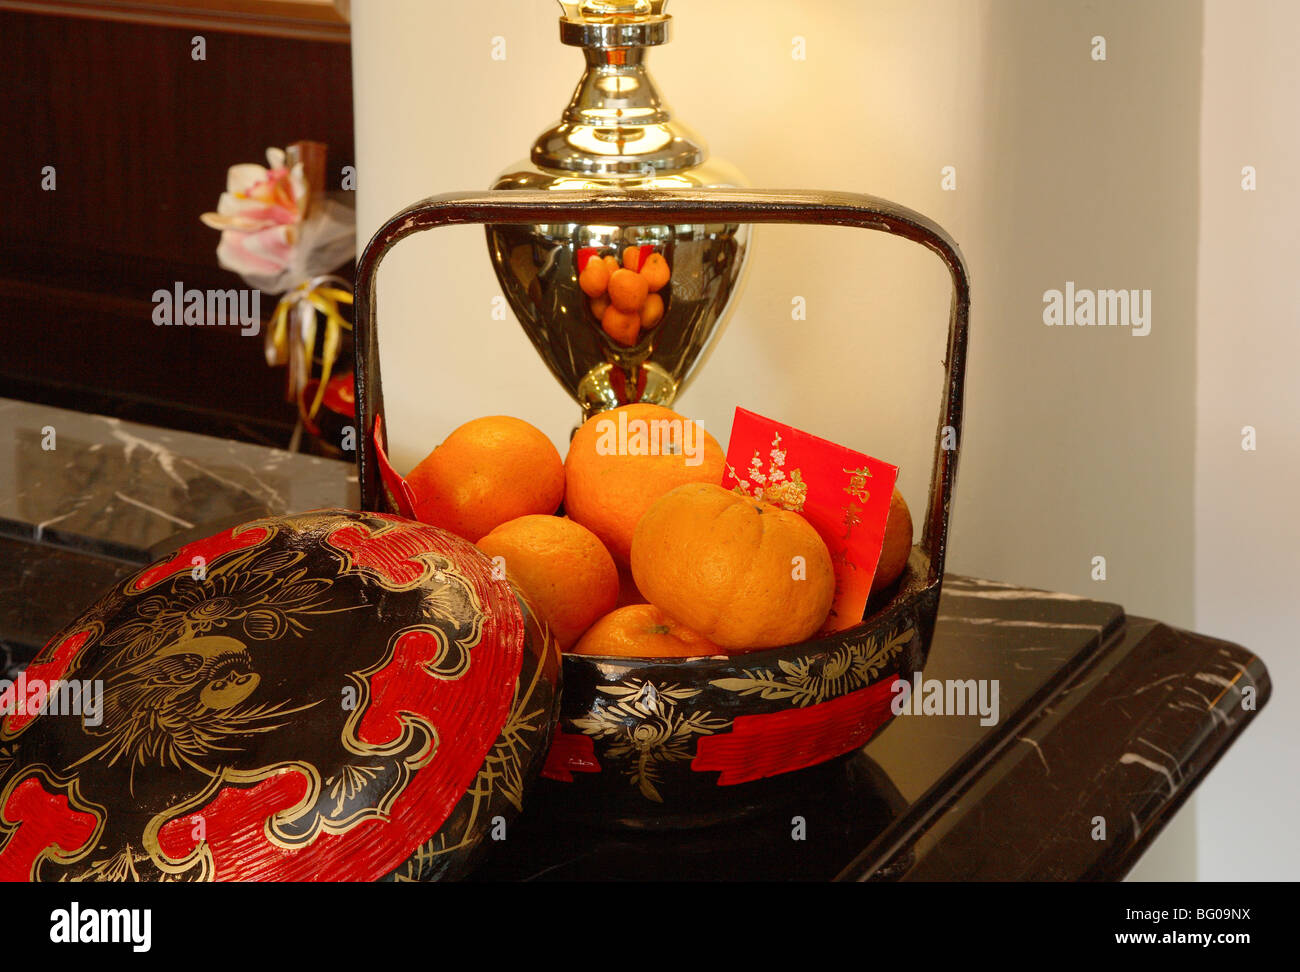 Chinese New Year decoration with oranges and red packet Stock Photo